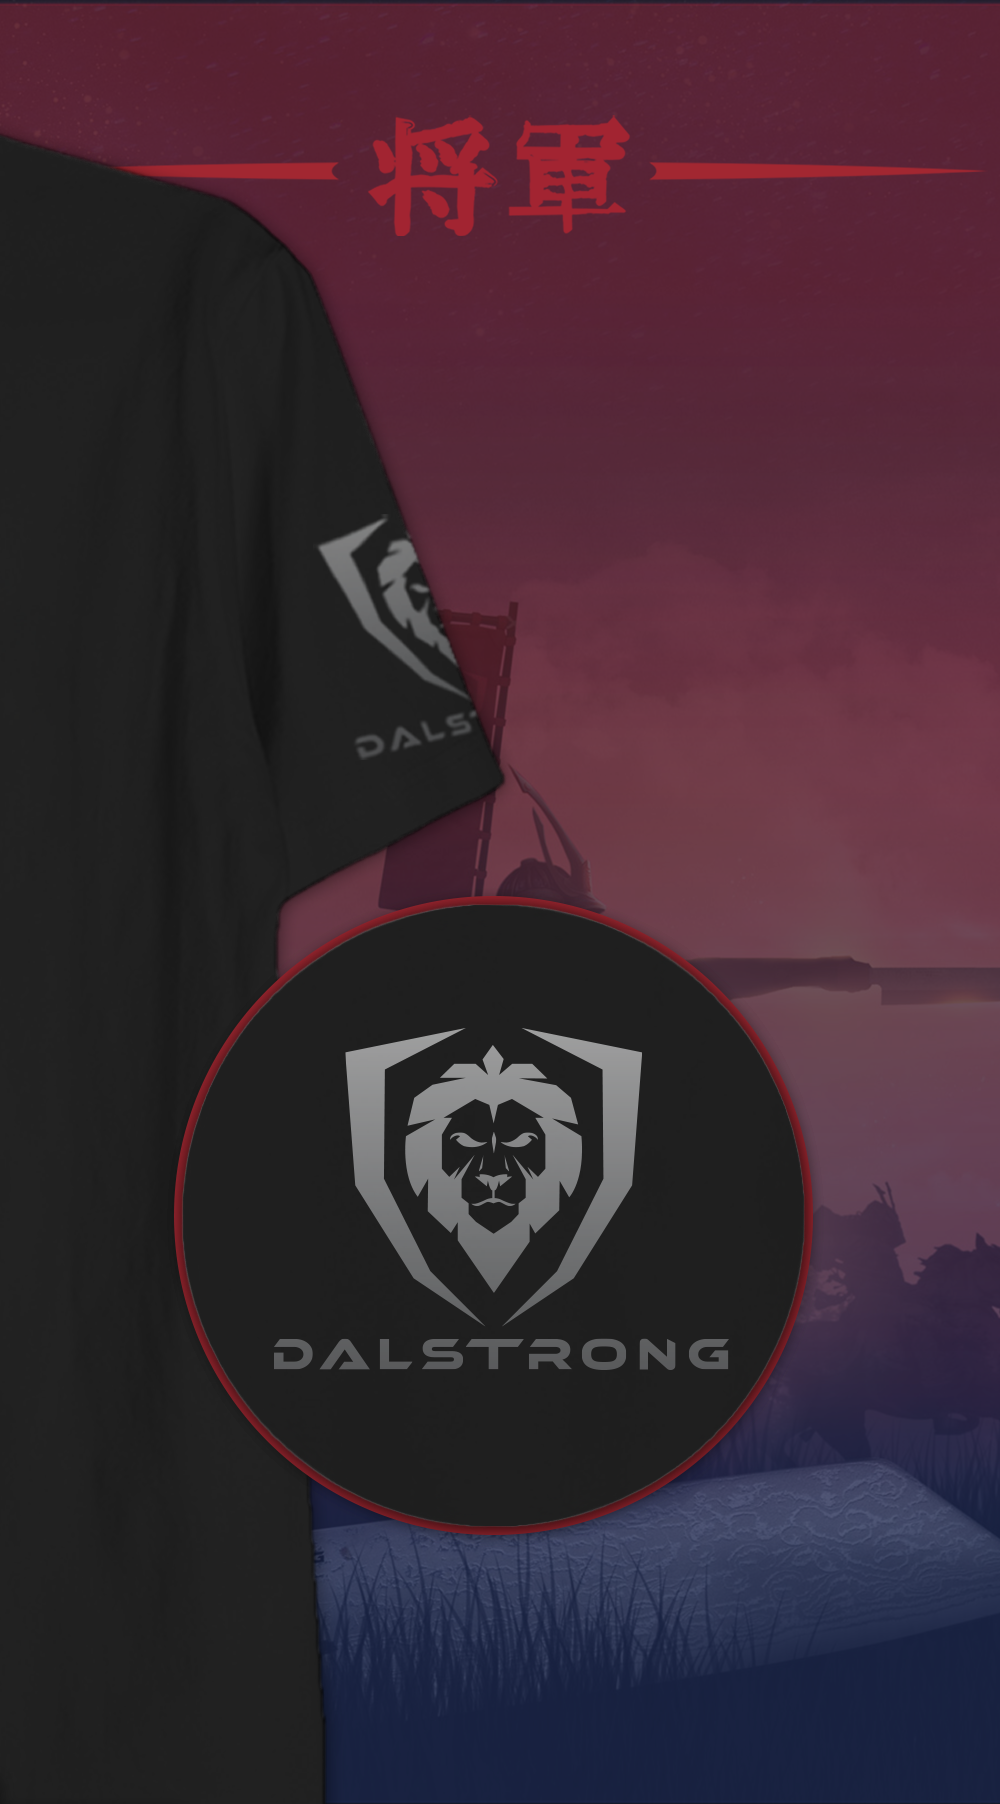 Dalstrong the shogun series war dance tee black with dalstrong name and logo.